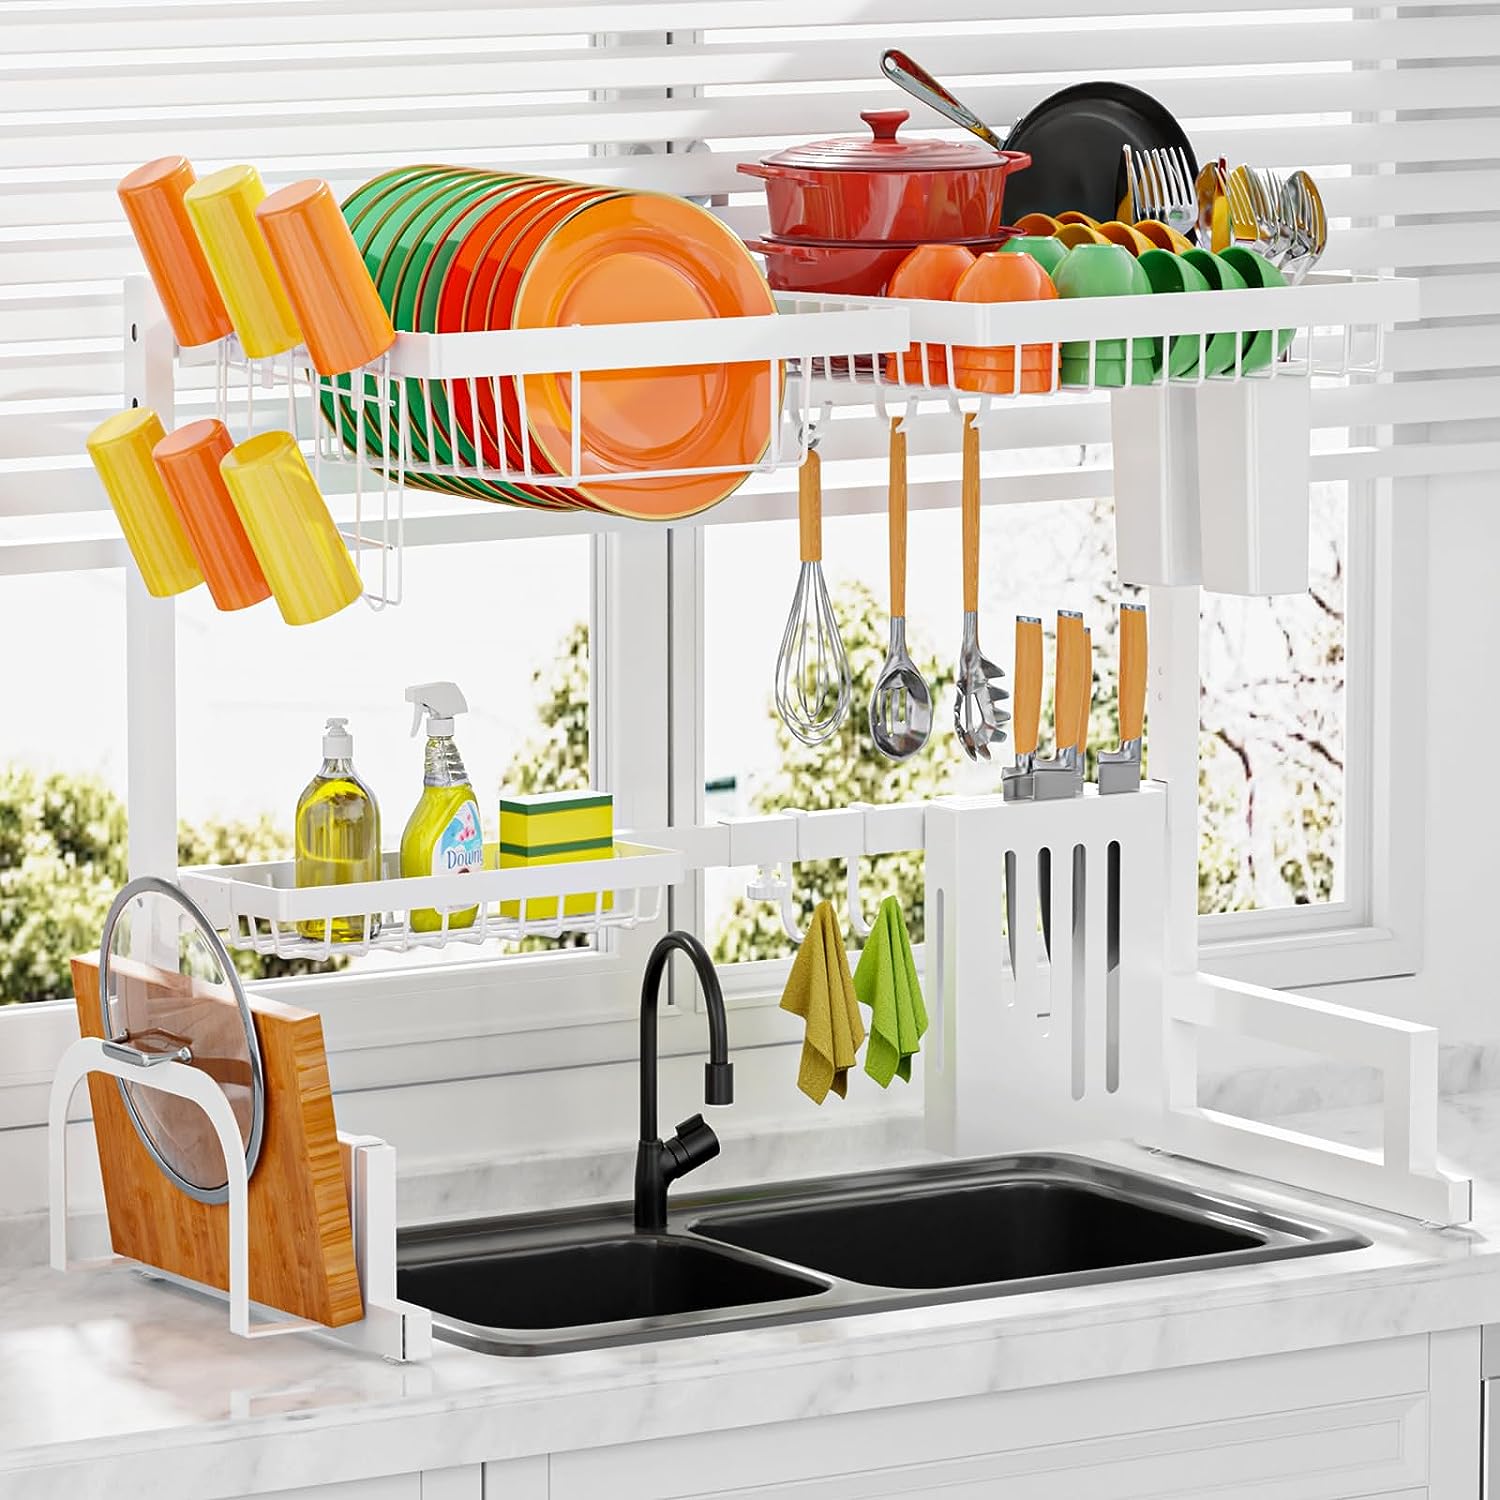 VENETIO White Over The Sink Dish Drying Rack - Adjustable (29.5-35.5in) Drying Rack w/Large Capacity, Space-Saving Dish Rack for Kitchen Counter, 2-Tier Dish Drying Rack, Premium Stainless Steel ➡ SO-00039